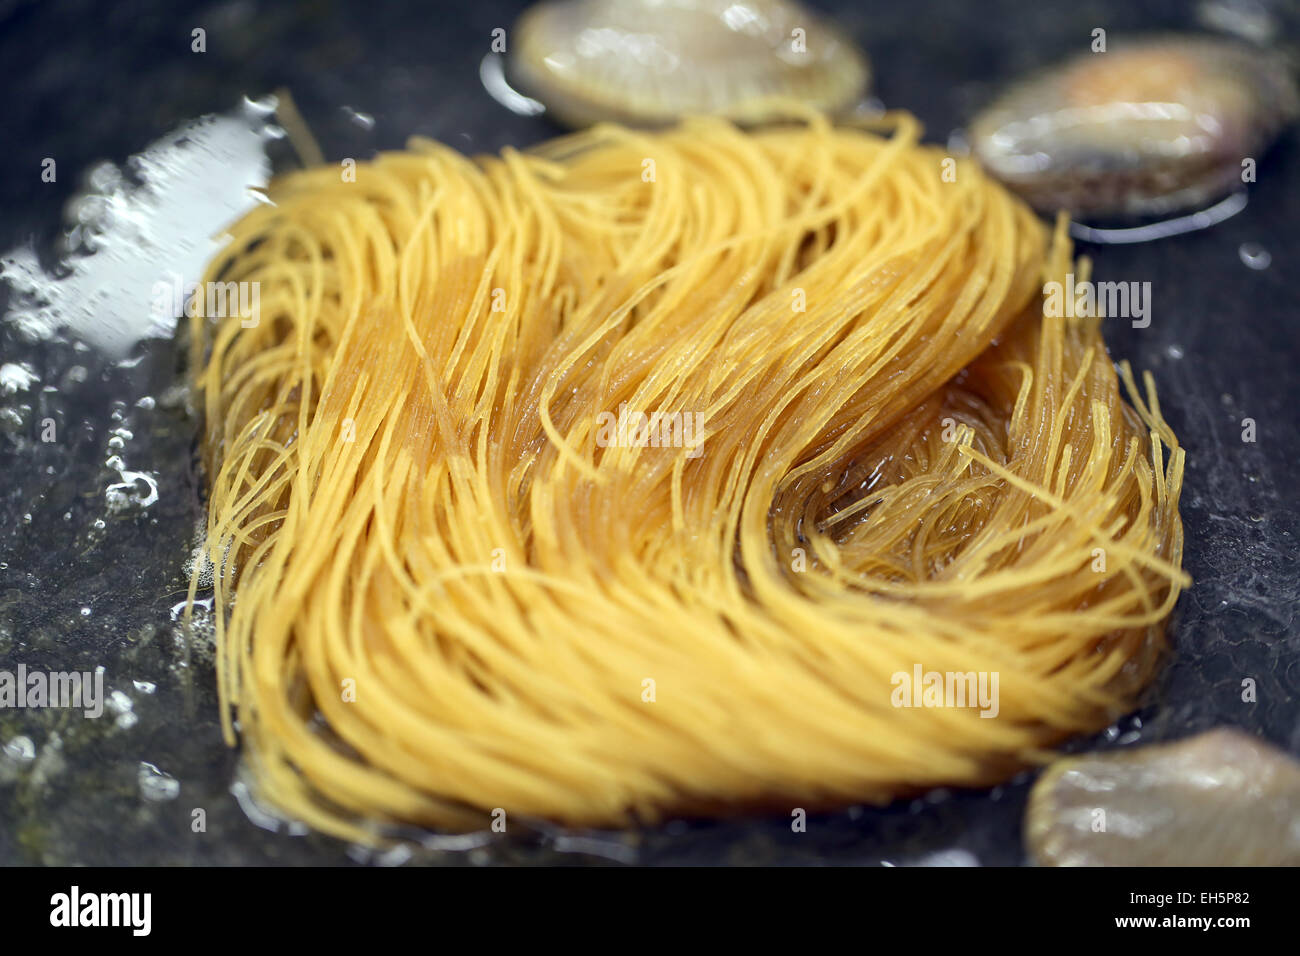 Rice noodles fried clams with buttered for foods menu. Stock Photo